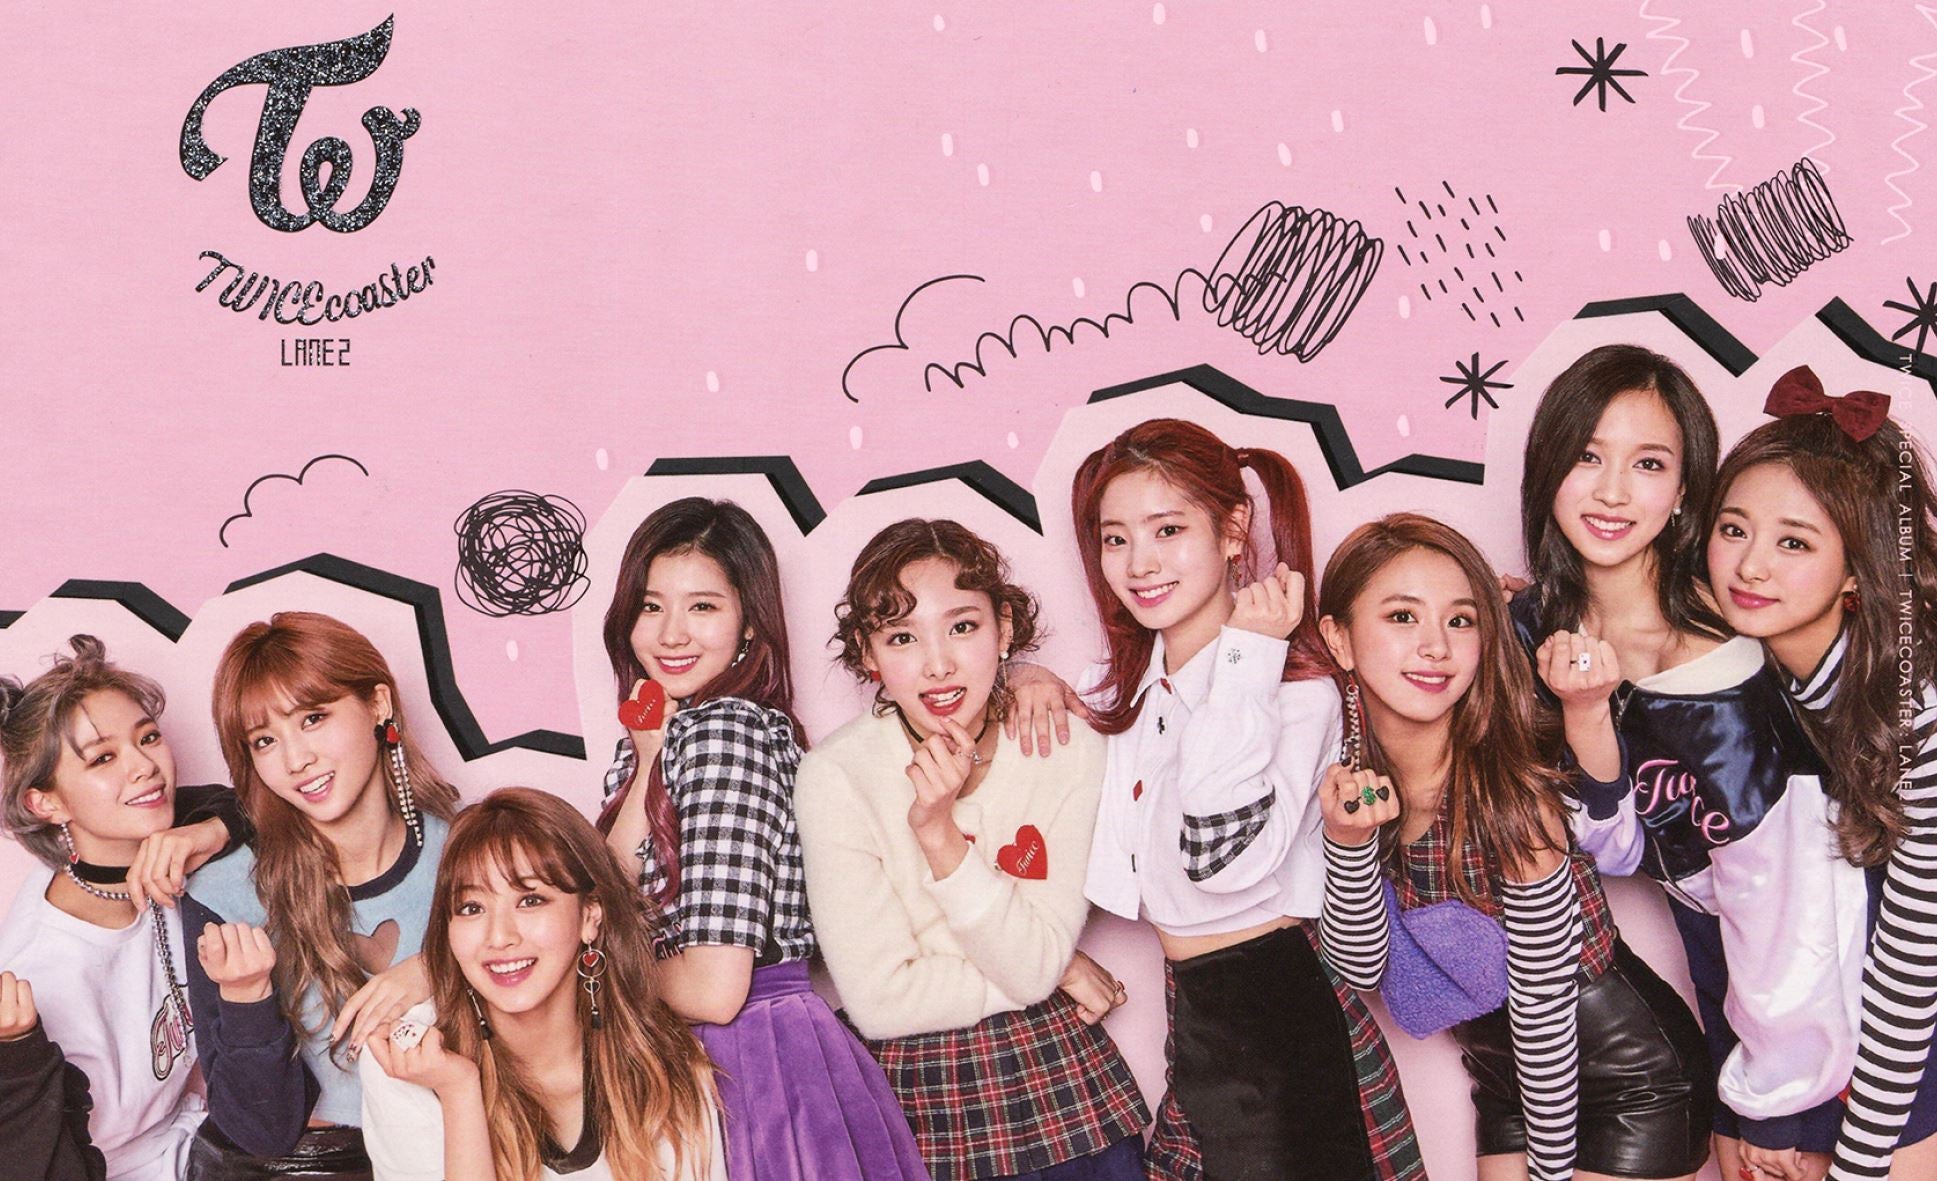 This is the story of a girl group that touches our hearts: Twice